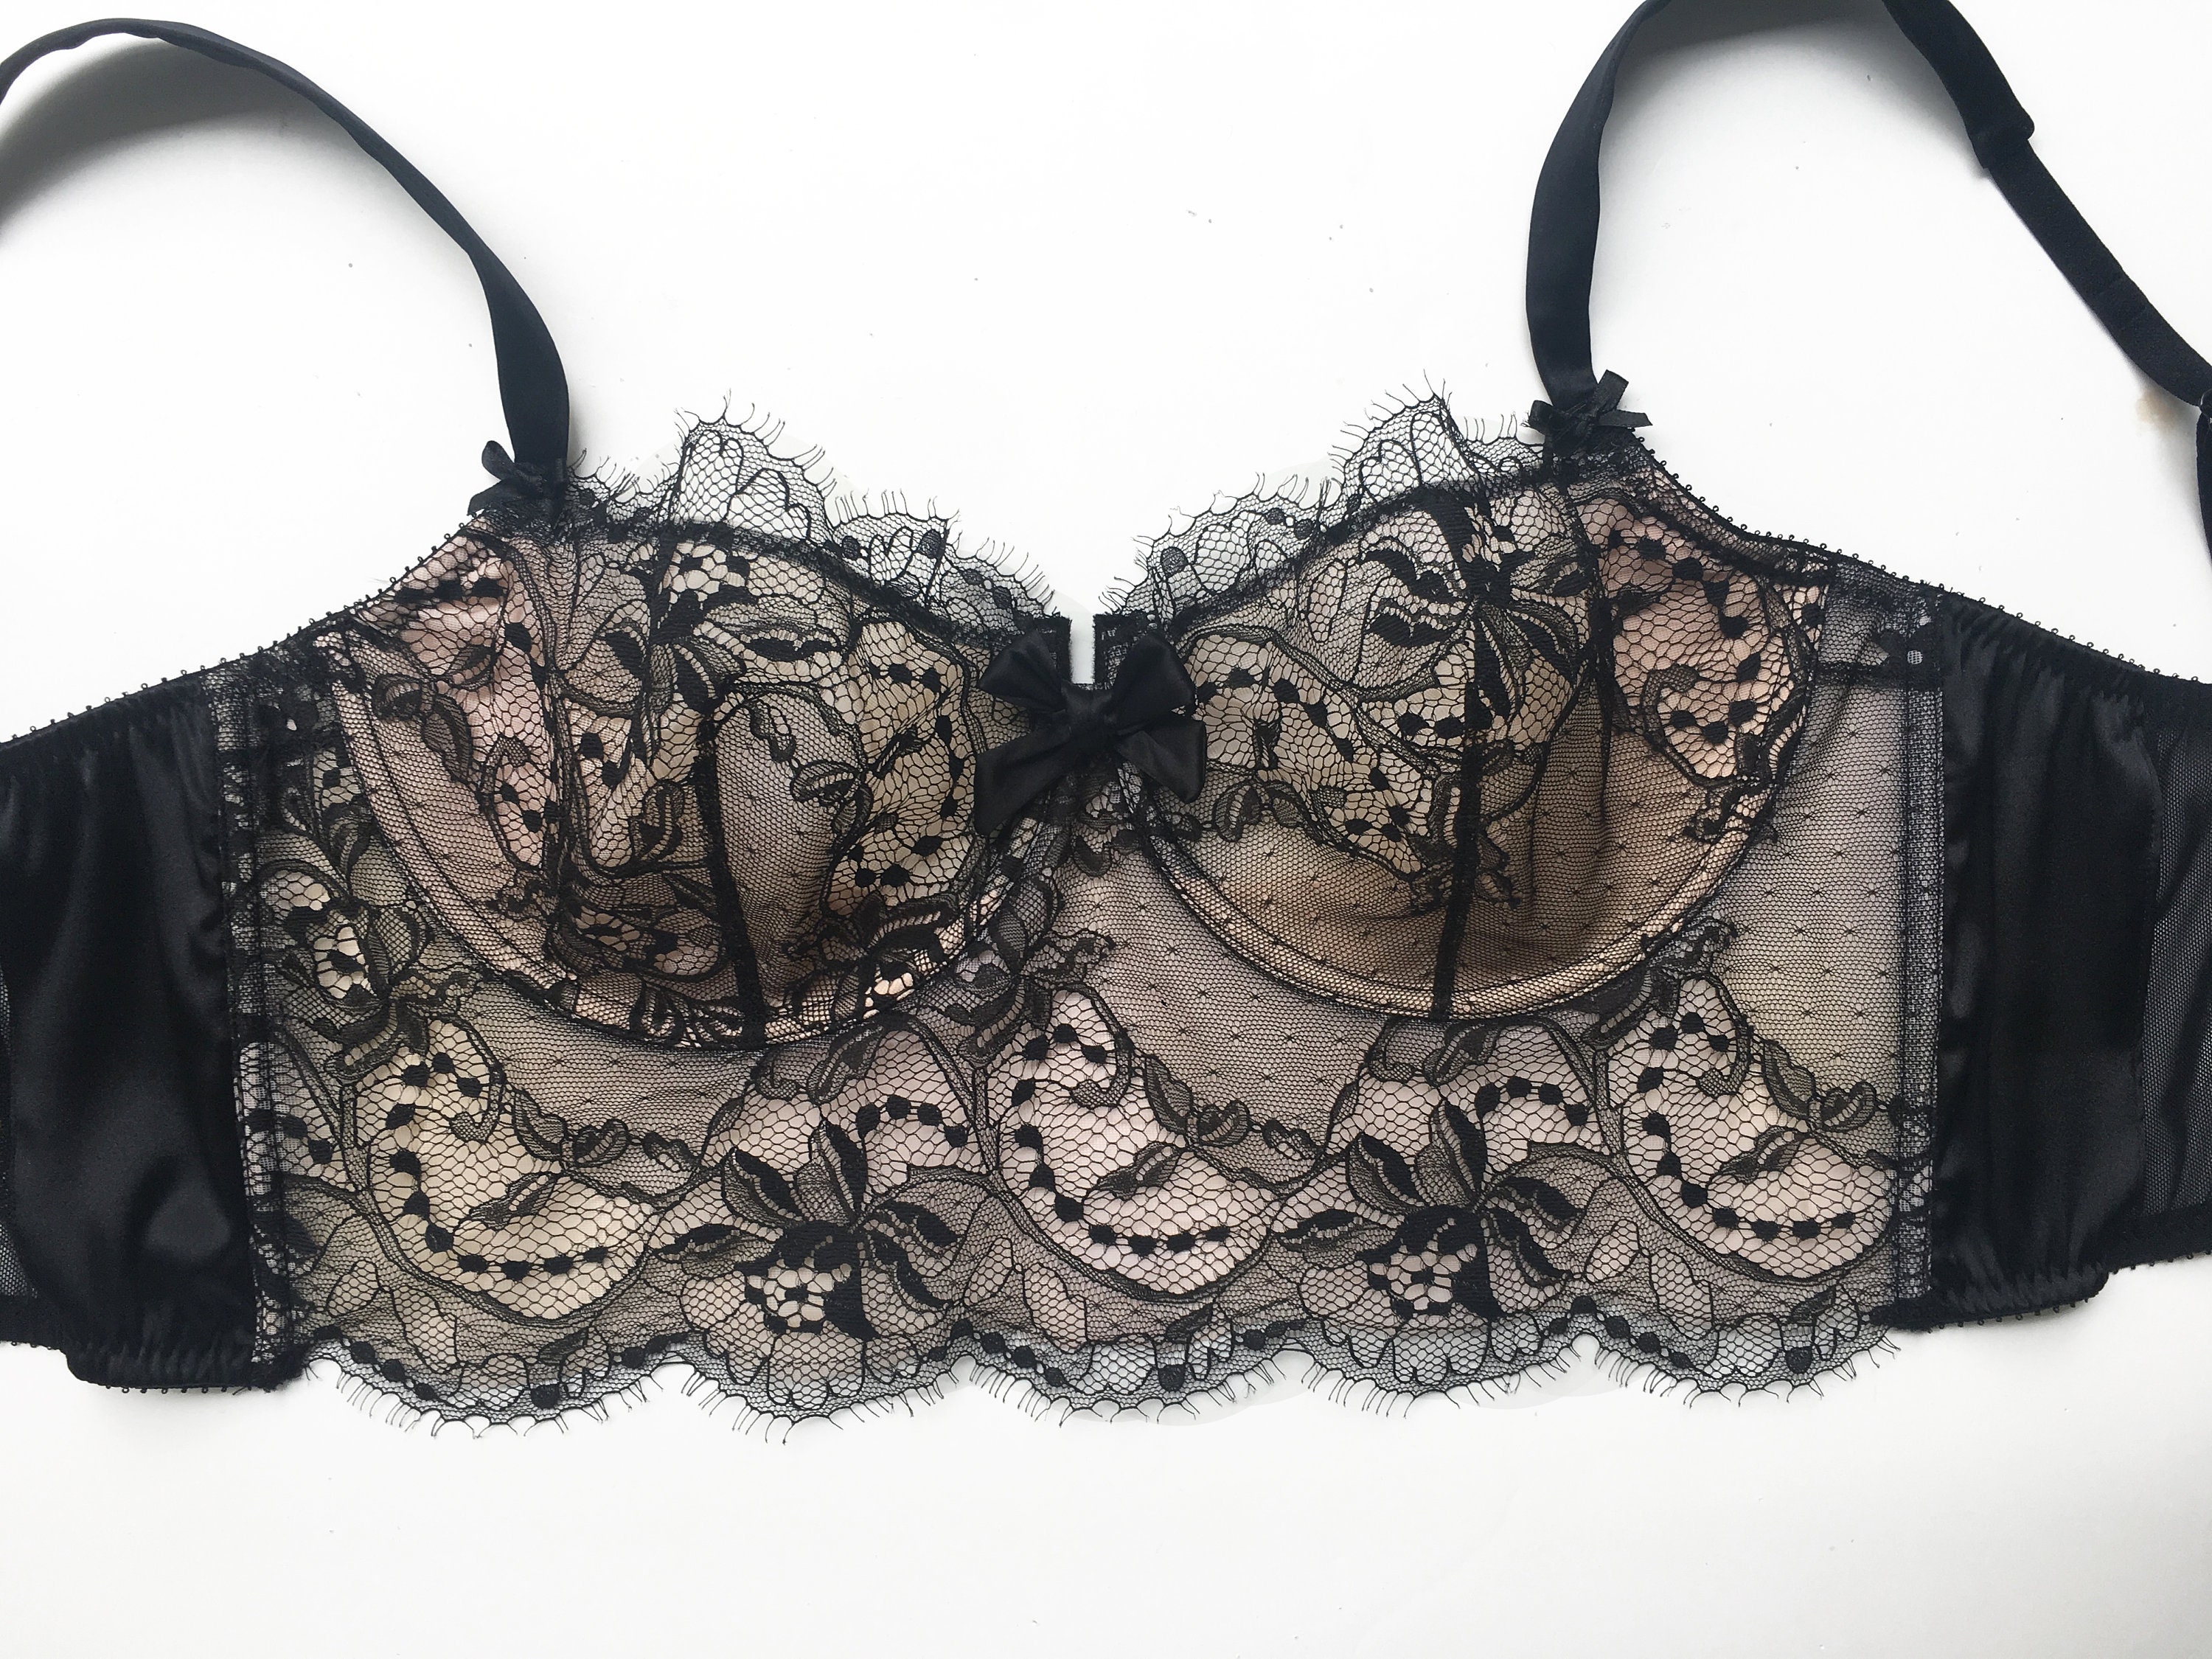 Lace Longline Bra in Black French Chantilly Lace, Satin Silk and